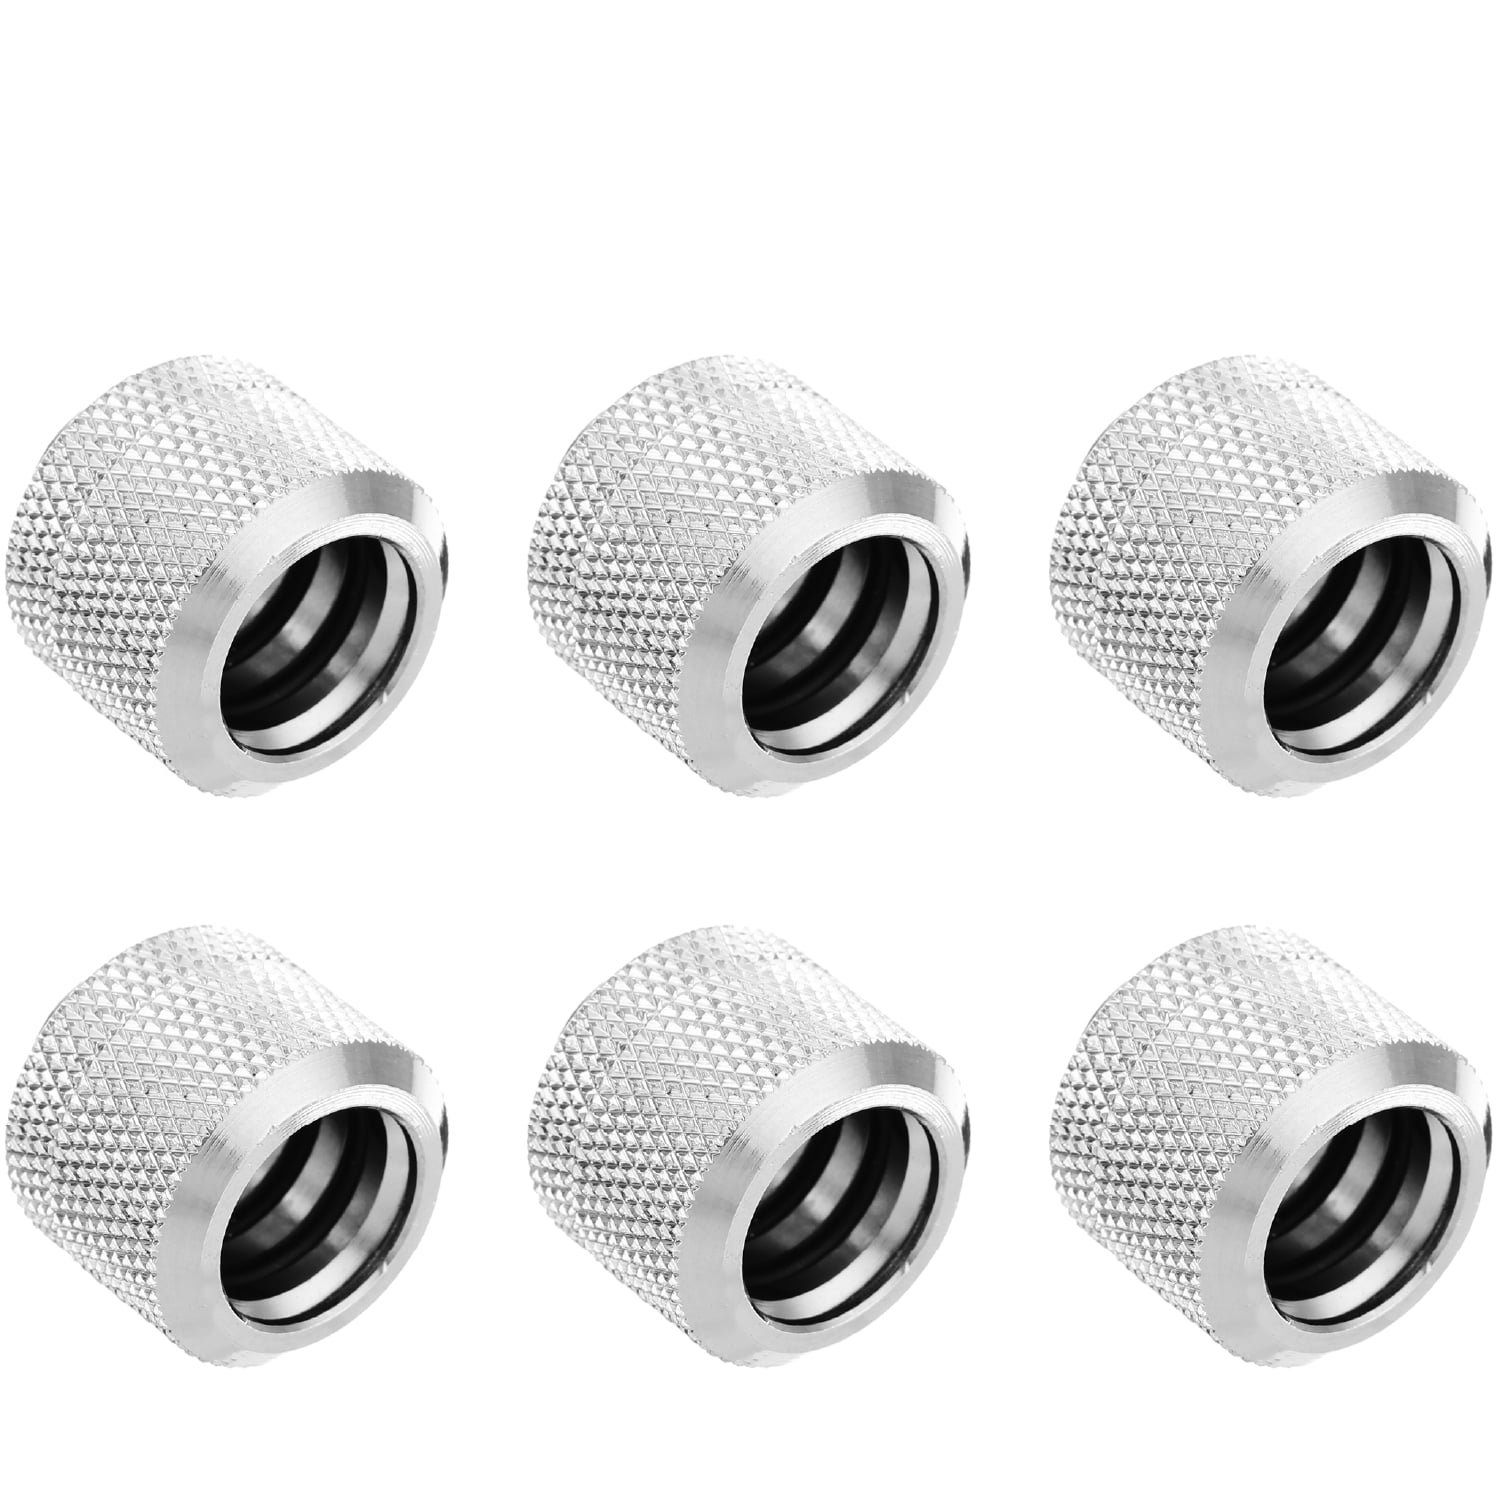 Dracaena G1/4 thread to 3/8 ID White 5/8 OD Compression Fitting for Soft Tubing Soft Tube Connectors for Computer Water Cooling System 2 pcs per pack Black 